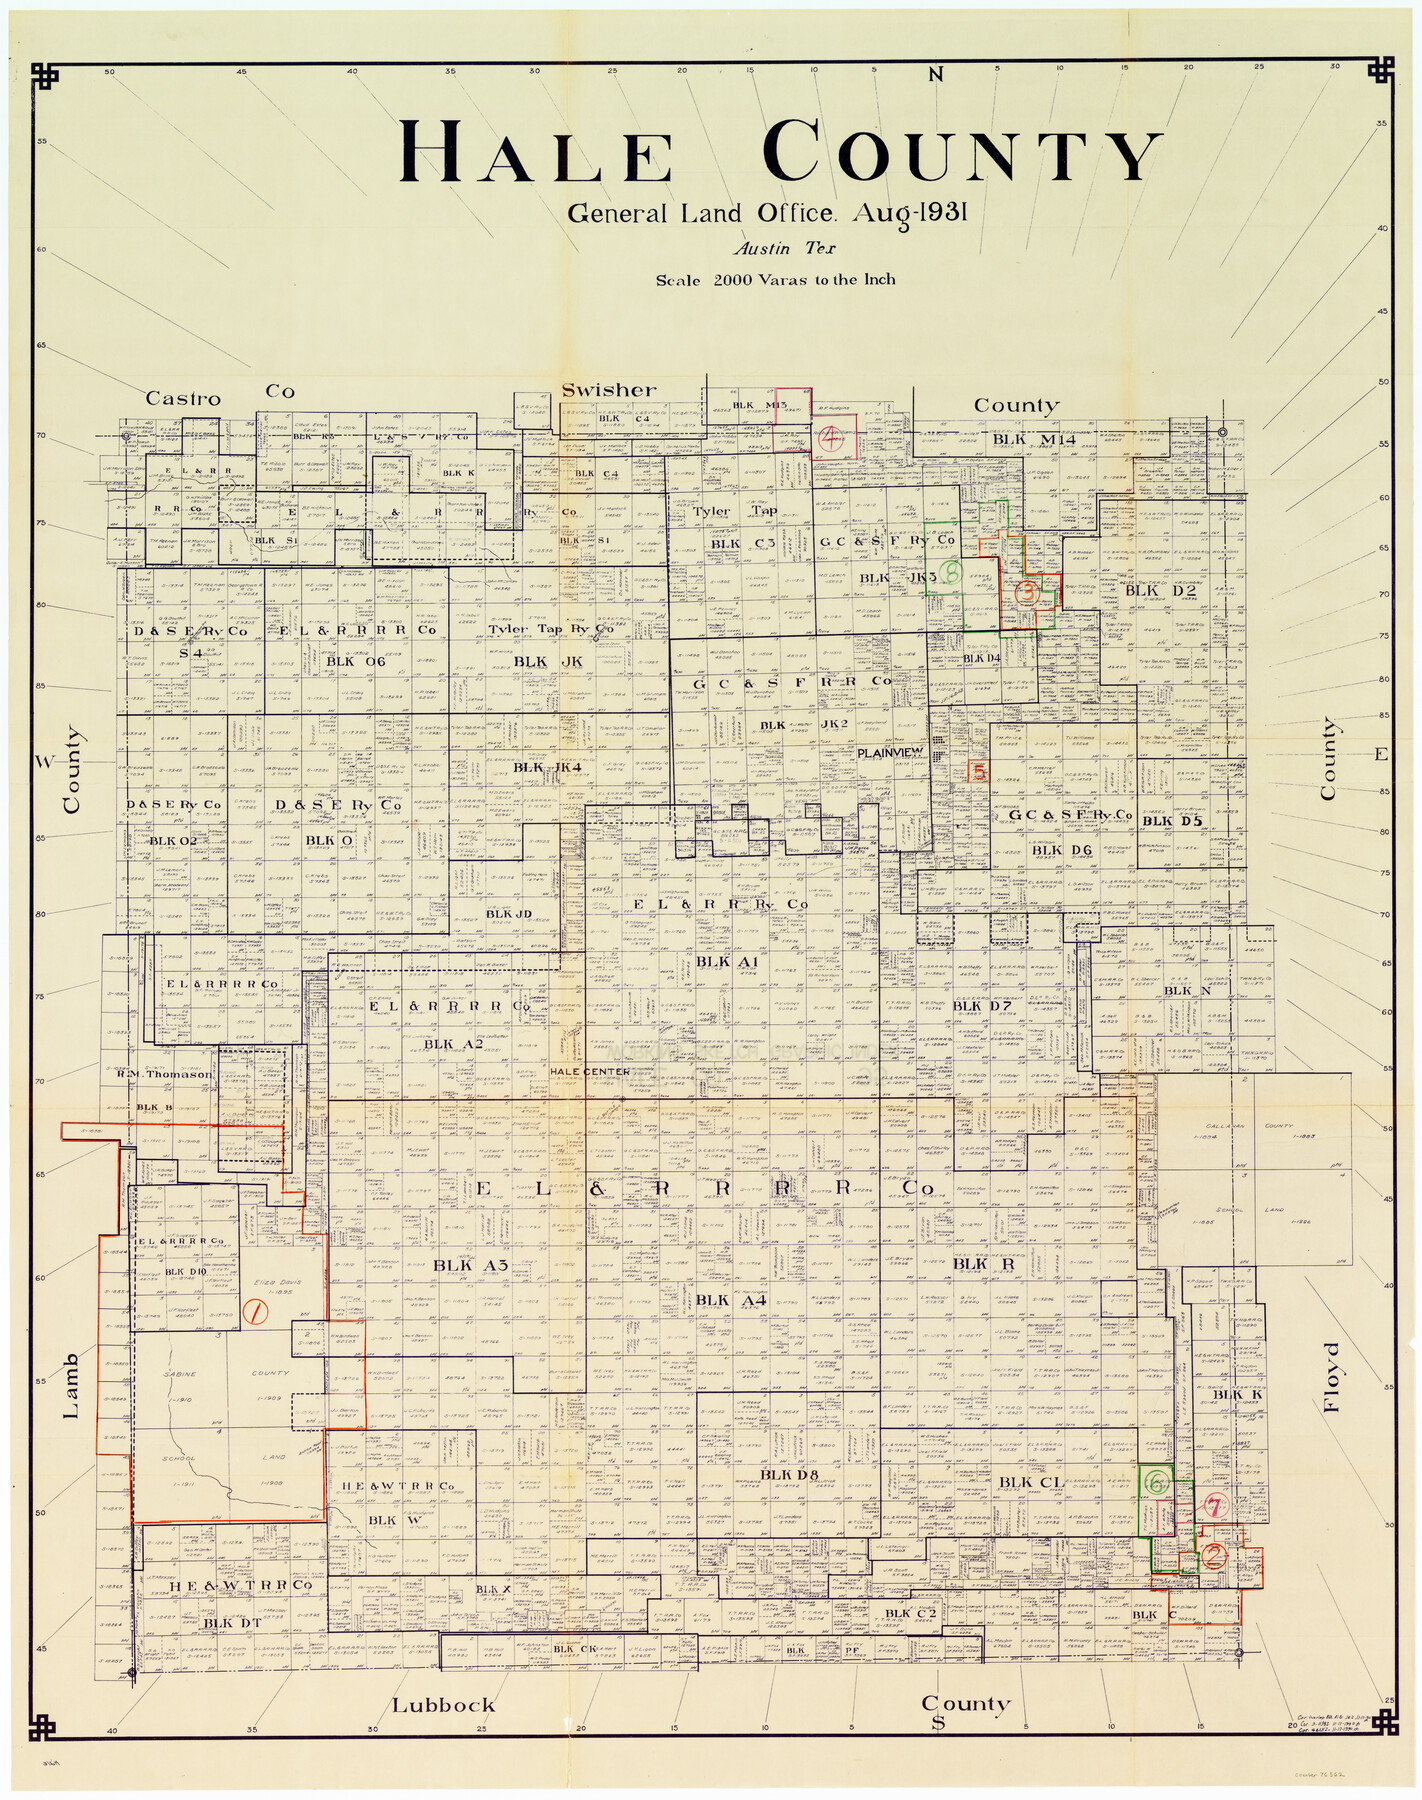 76562, Hale County Working Sketch Graphic Index, General Map Collection